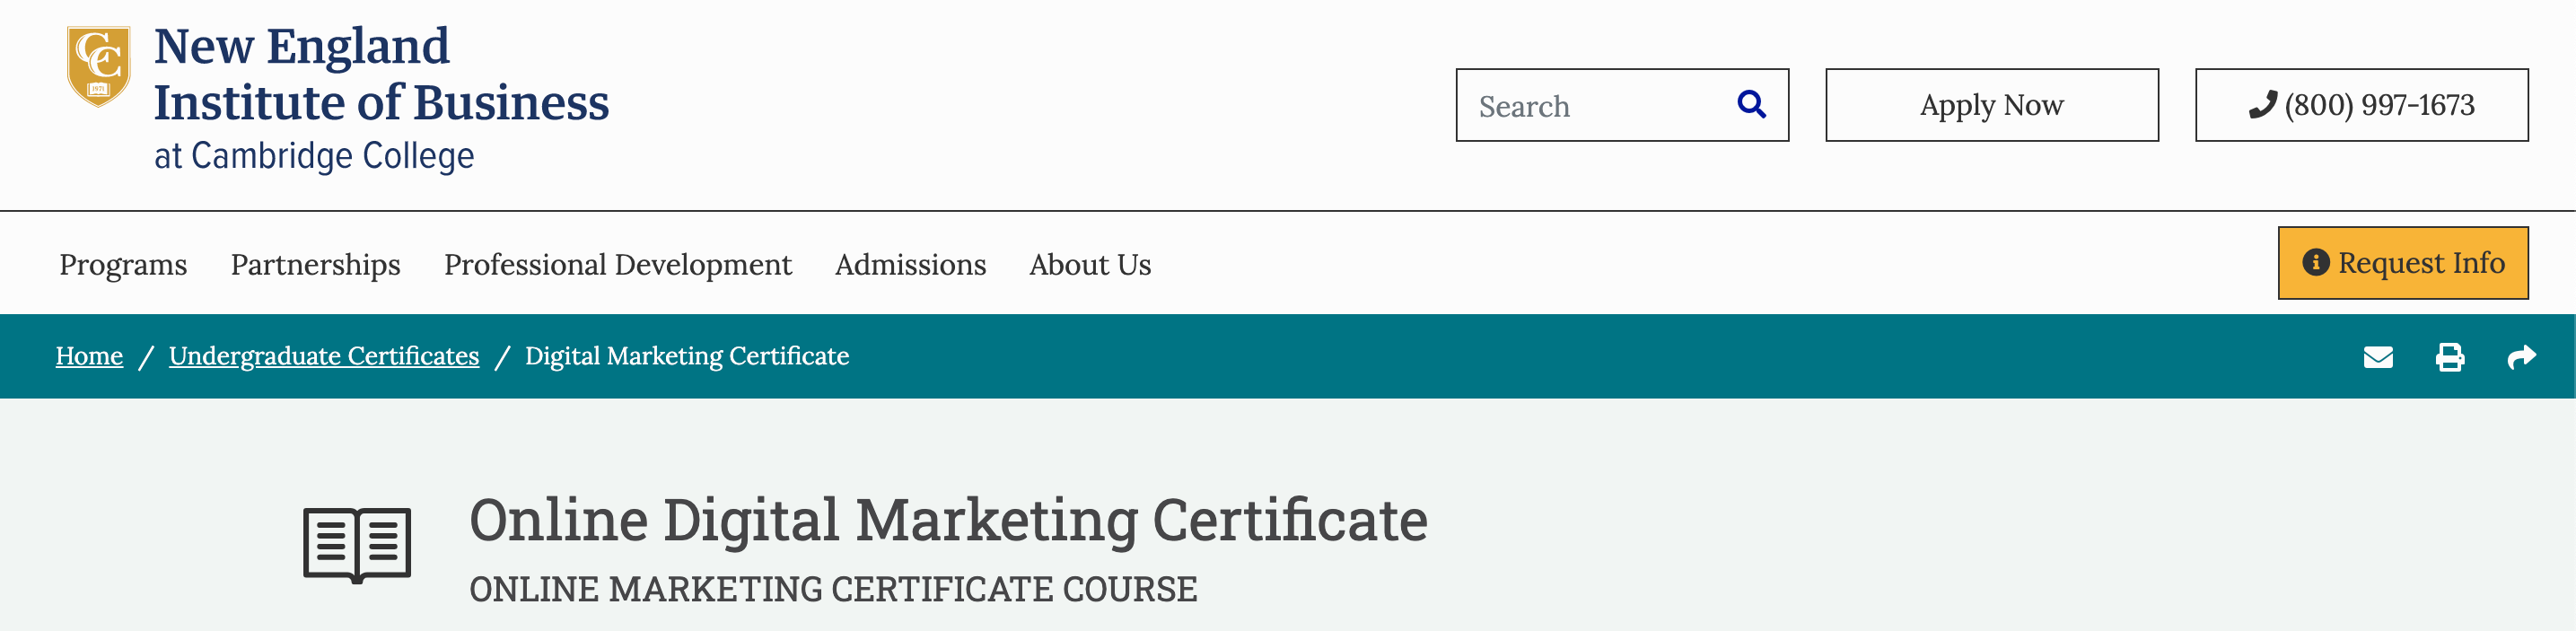 New England College of Business Online Digital Marketing Certificate landing page